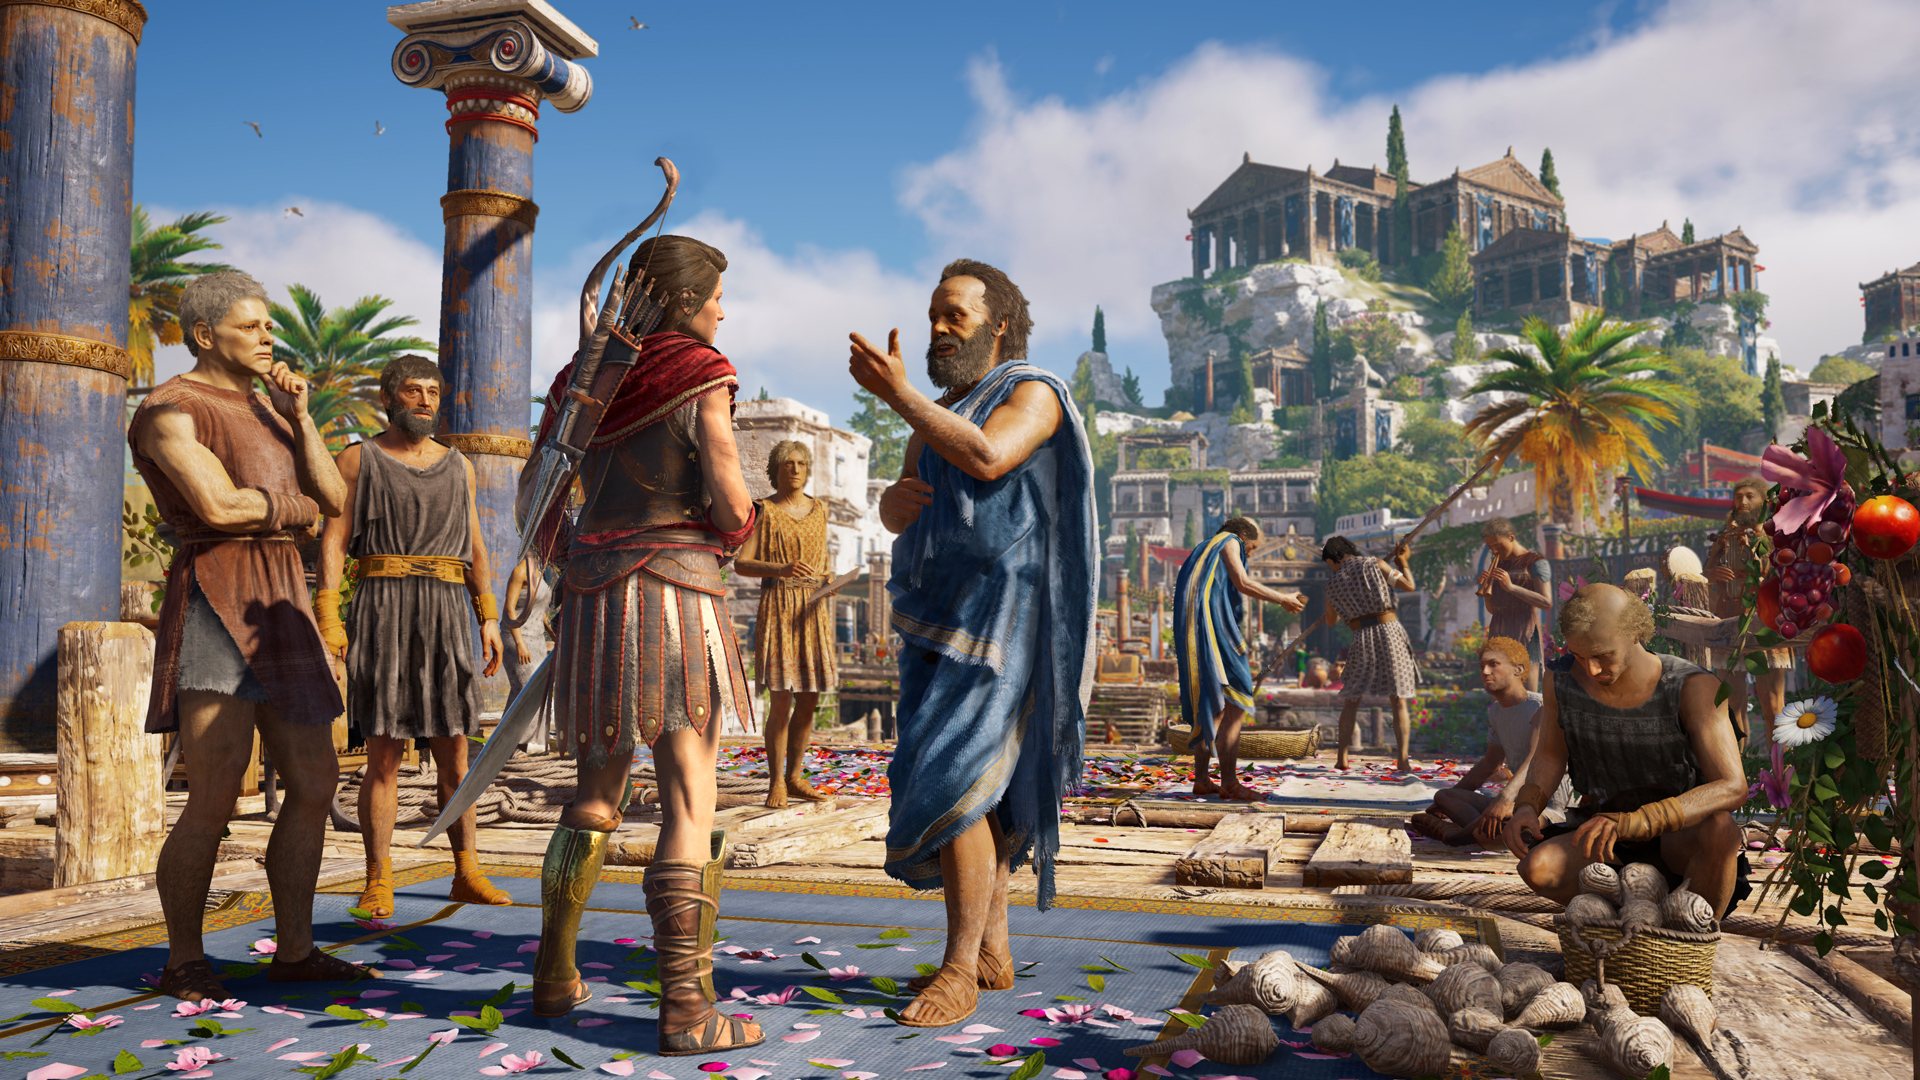 Assassin's Creed Odyssey Deluxe Edition EU XBOX One CD Key